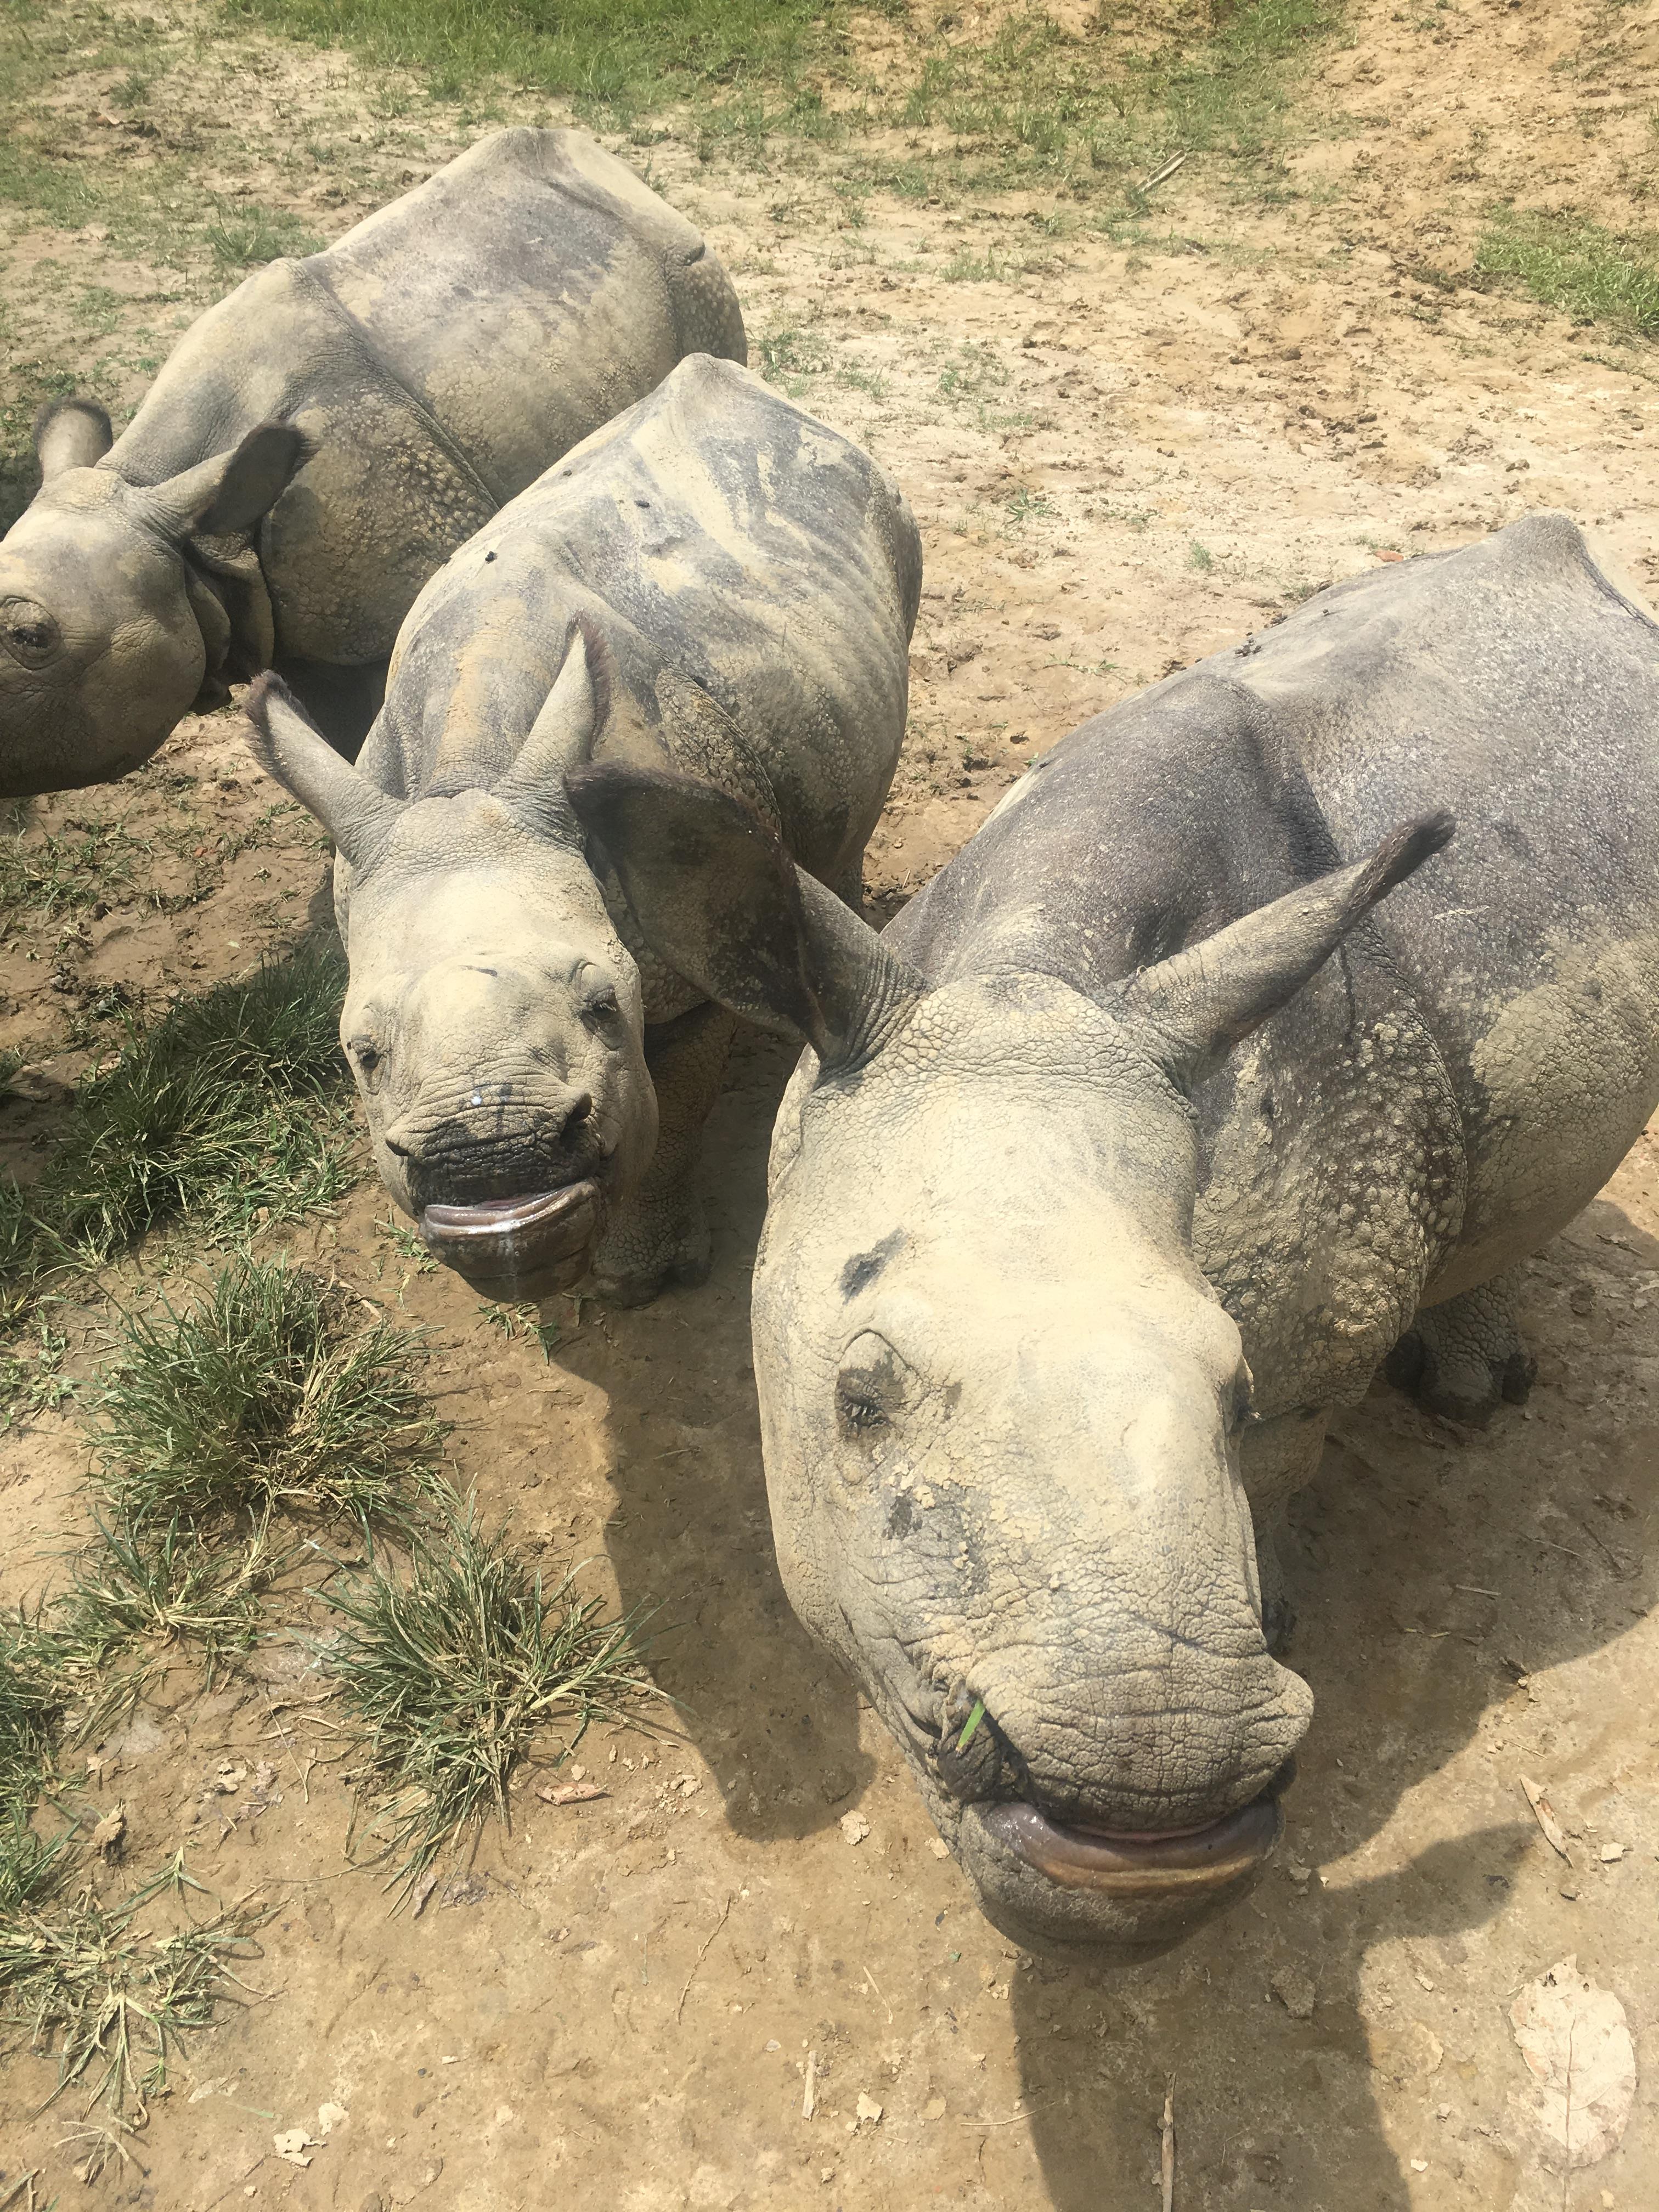 Kate Welch worked up close with rhinos in India.